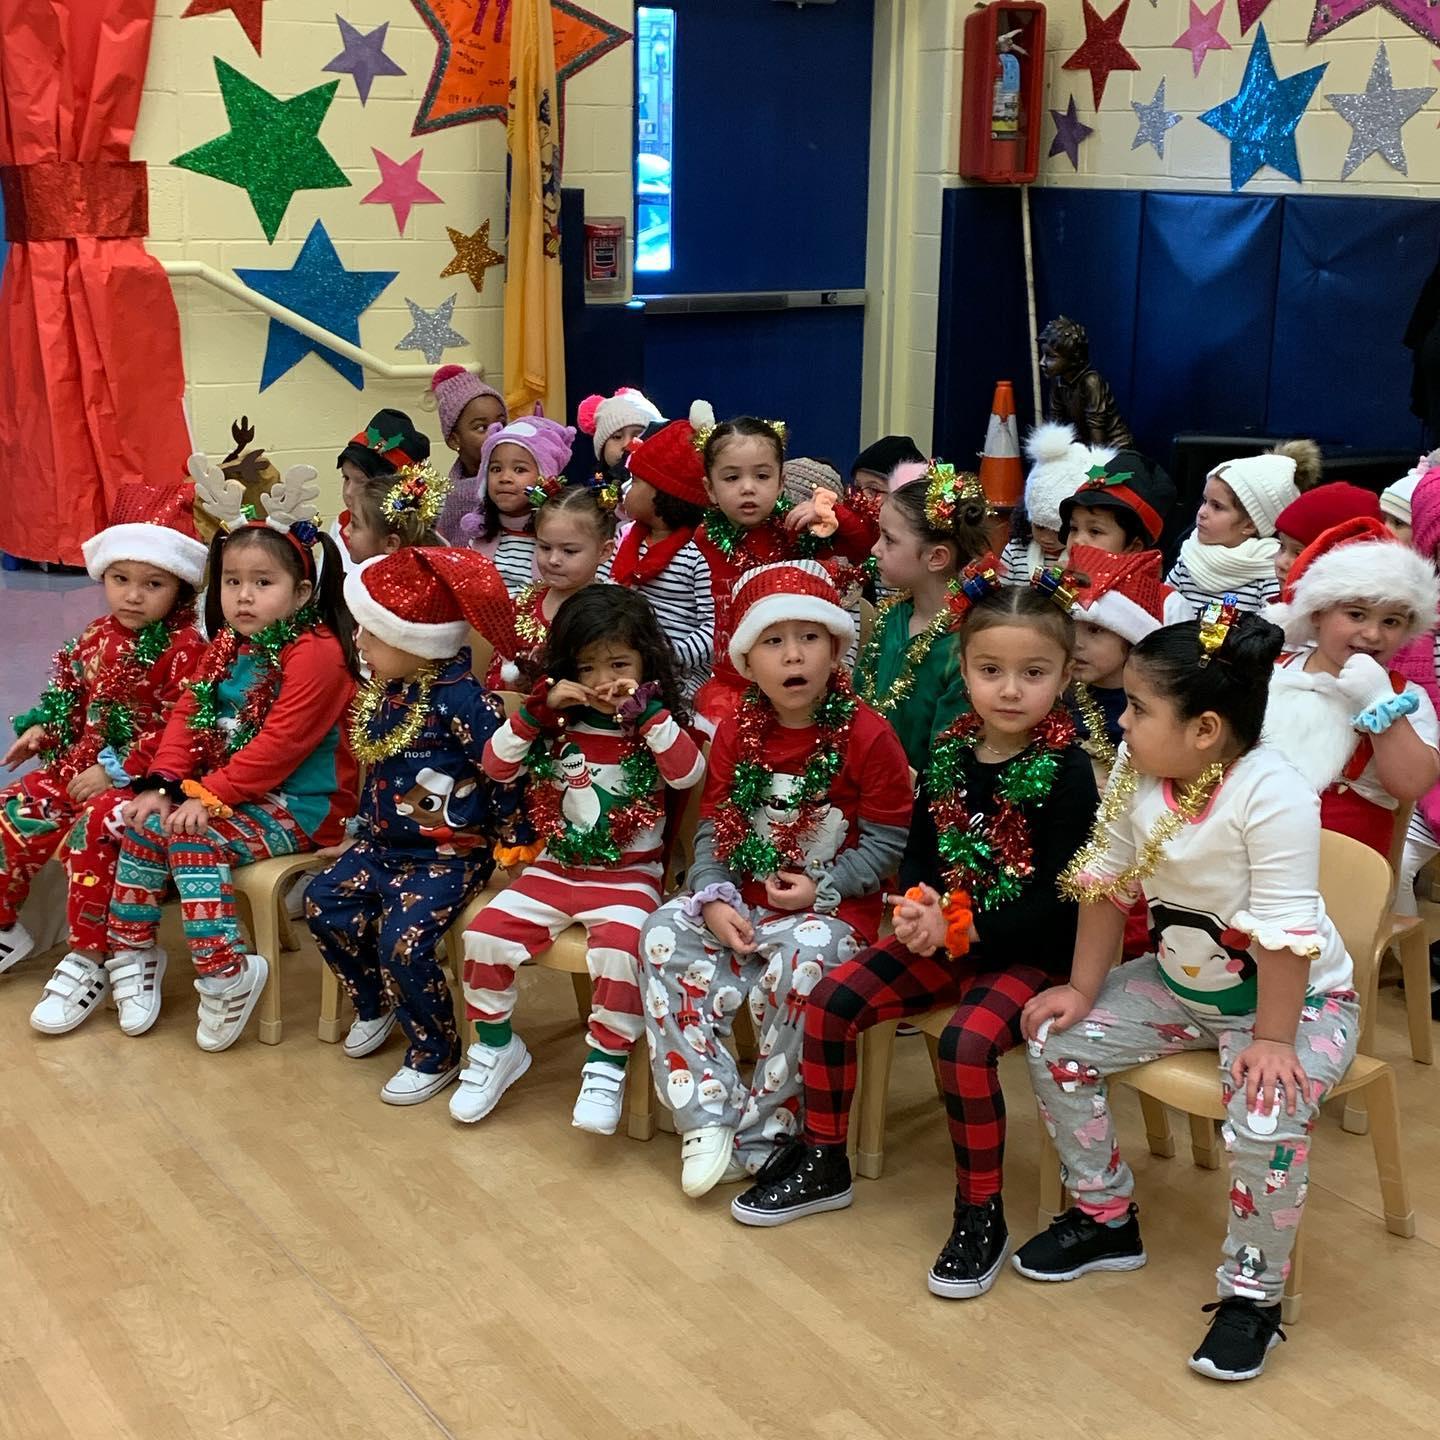 children seated and dressed in assorted Christmas outfits wearing sparkly garland